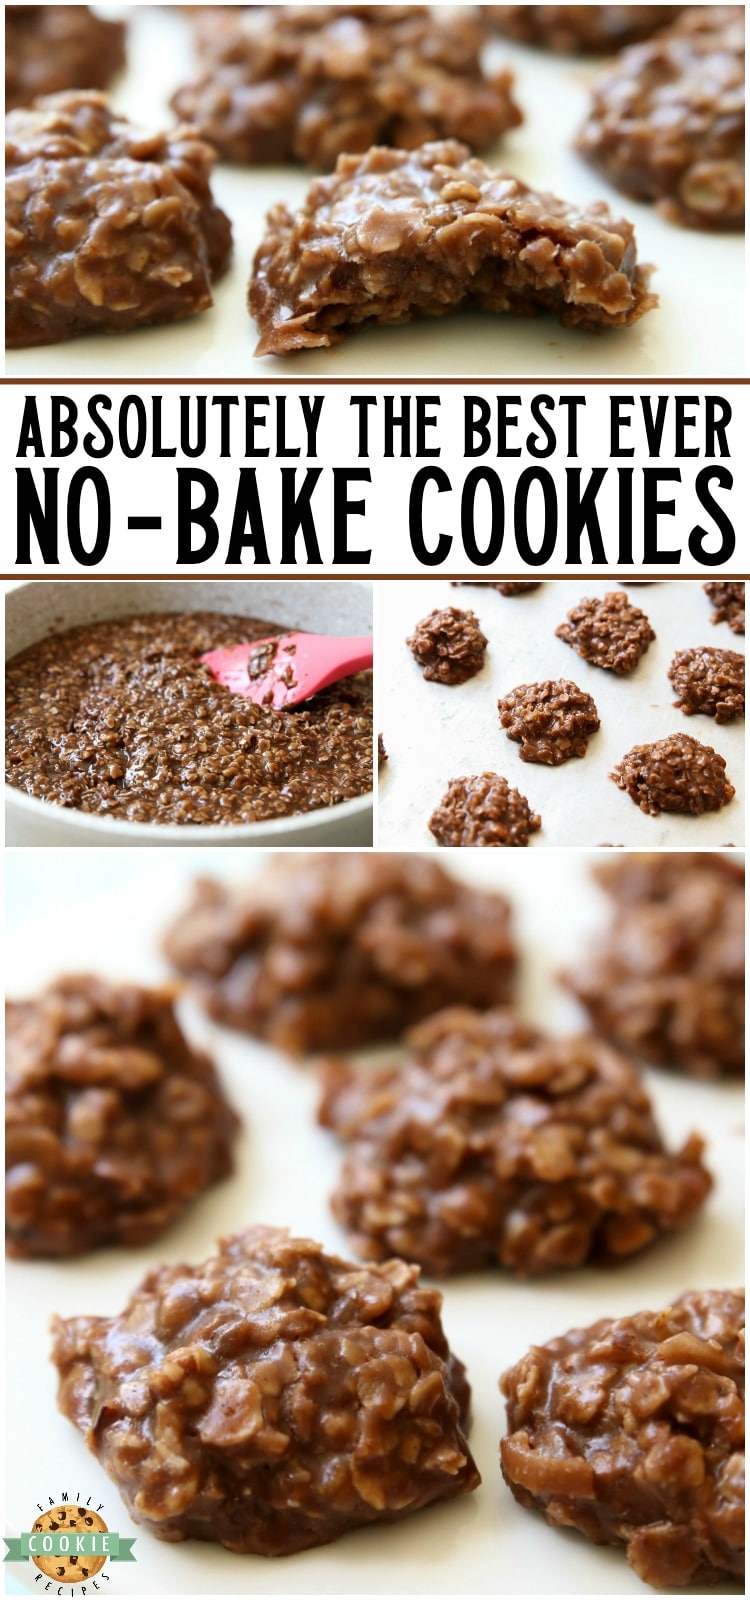 Easy No Bake Cookies are simple, oatmeal chocolate cookies that don't require baking time! I've tried many & this peanut butter no bake cookies recipe is the absolute BEST. via @buttergirls